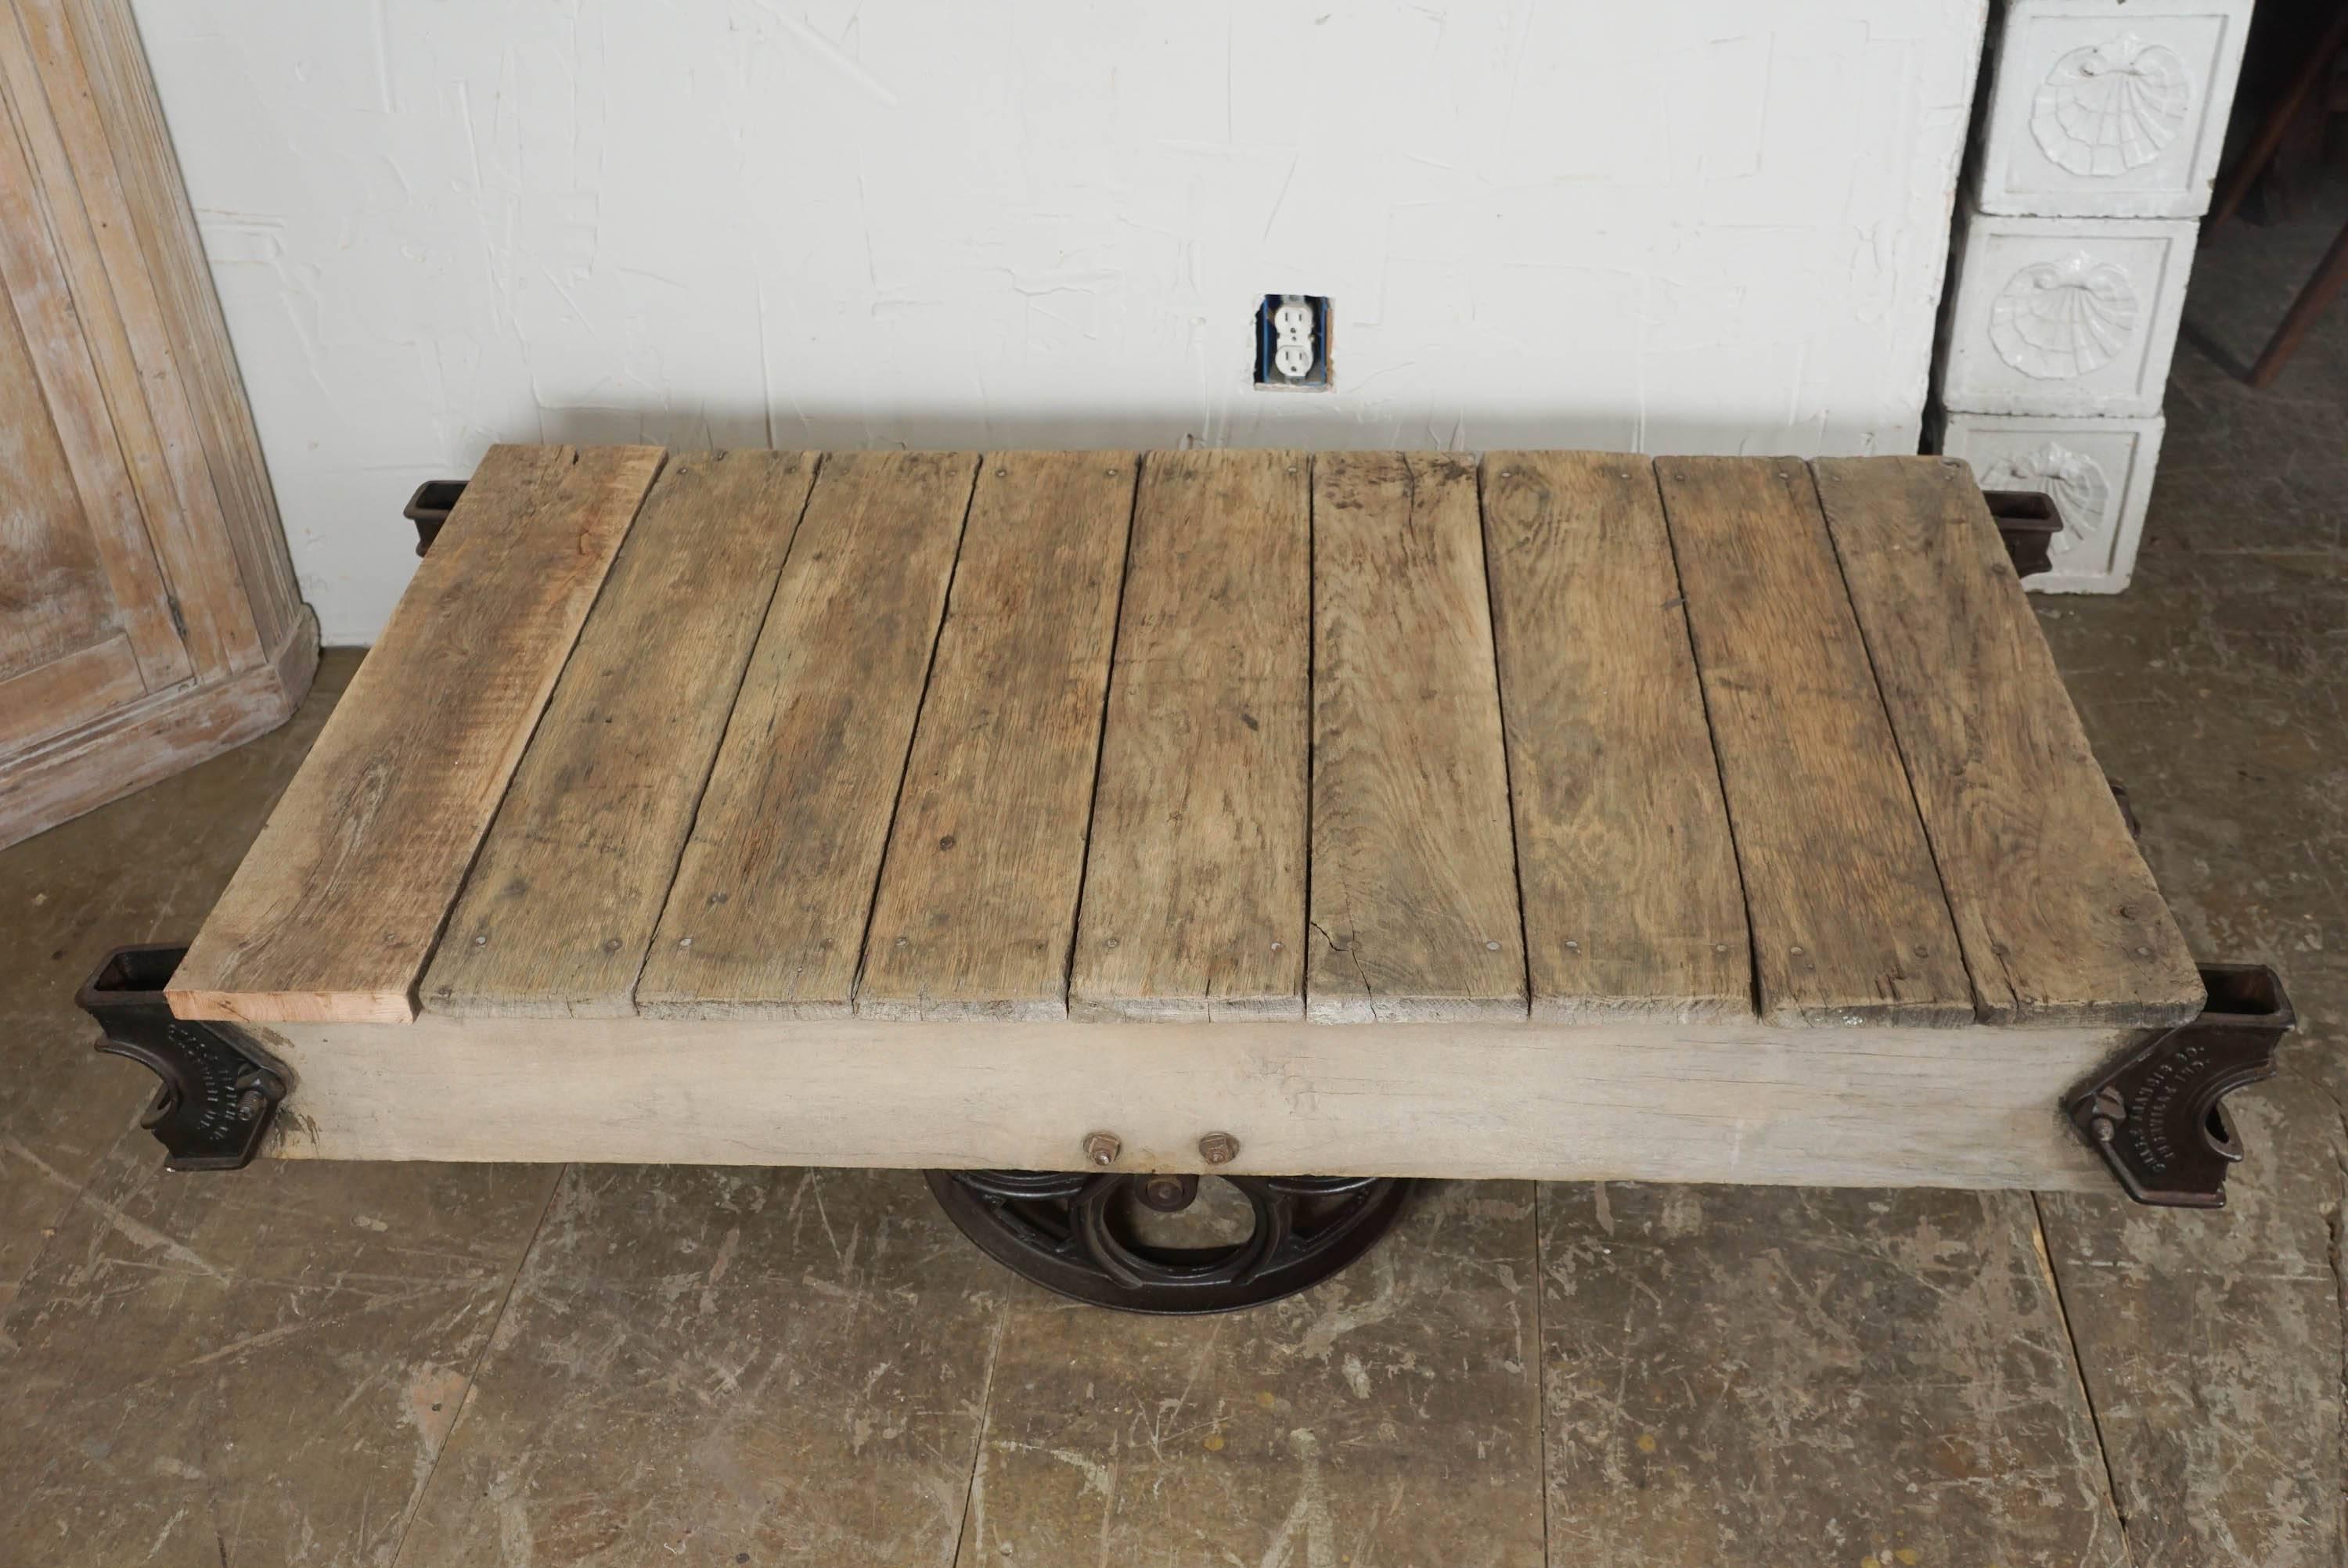 Vintage industrial rustic rolling cart made of wood planks and cast iron wheels and brackets, the loader has two end wheels that swivel and are slightly shorter than the larger sides ones for easier movability.  Cart does sit flat on the ground but